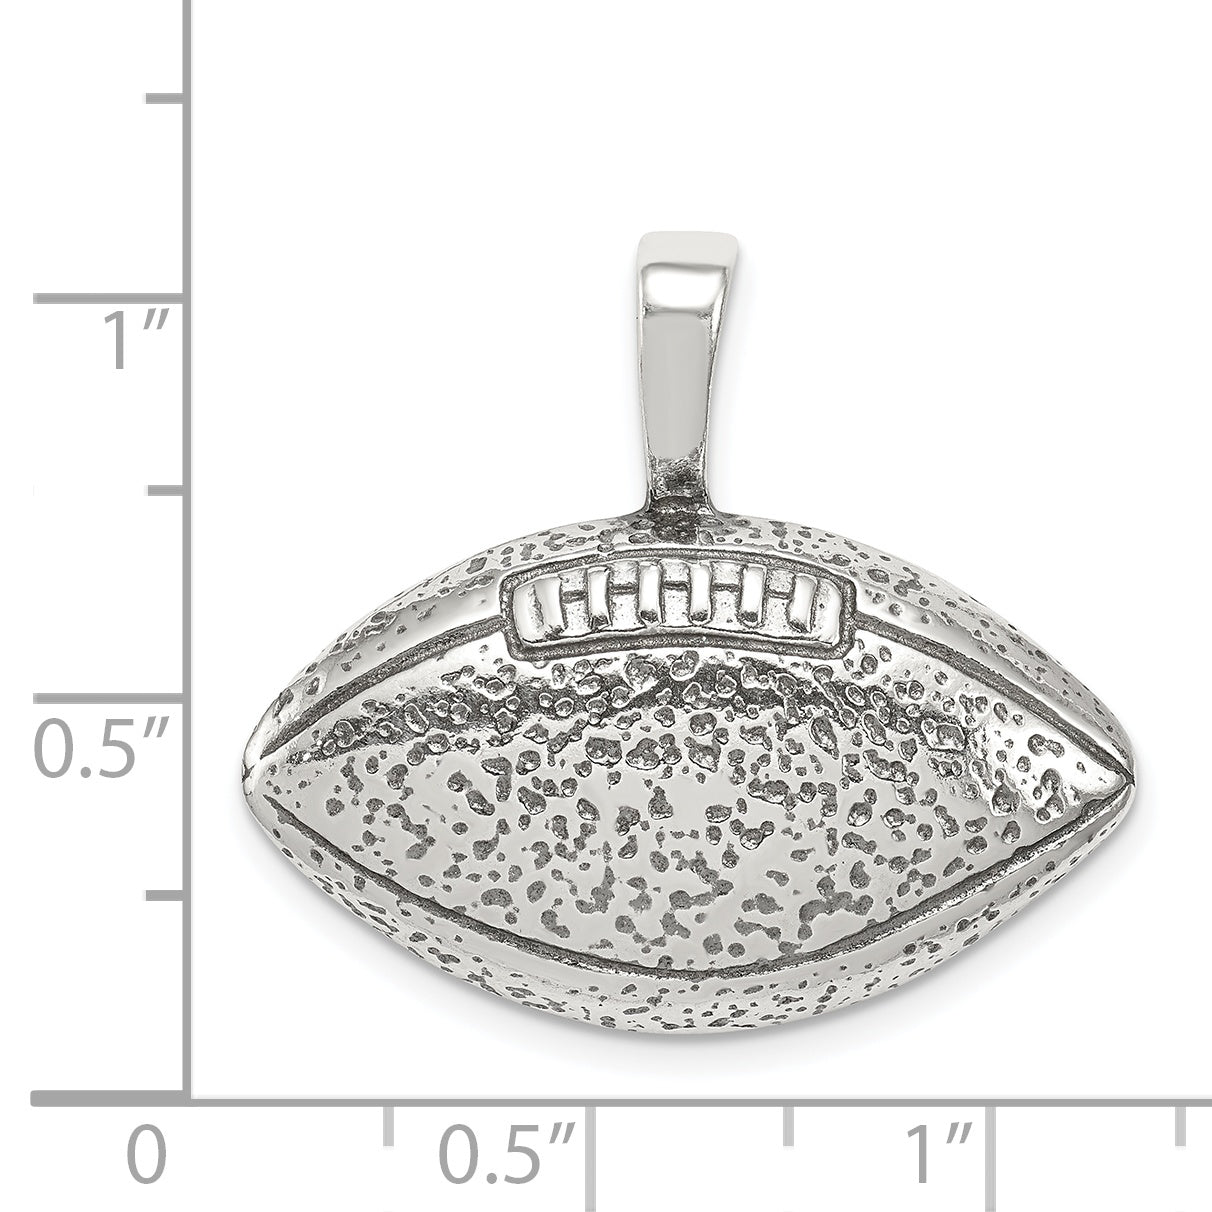 Sterling Silver Antiqued Football Pendant